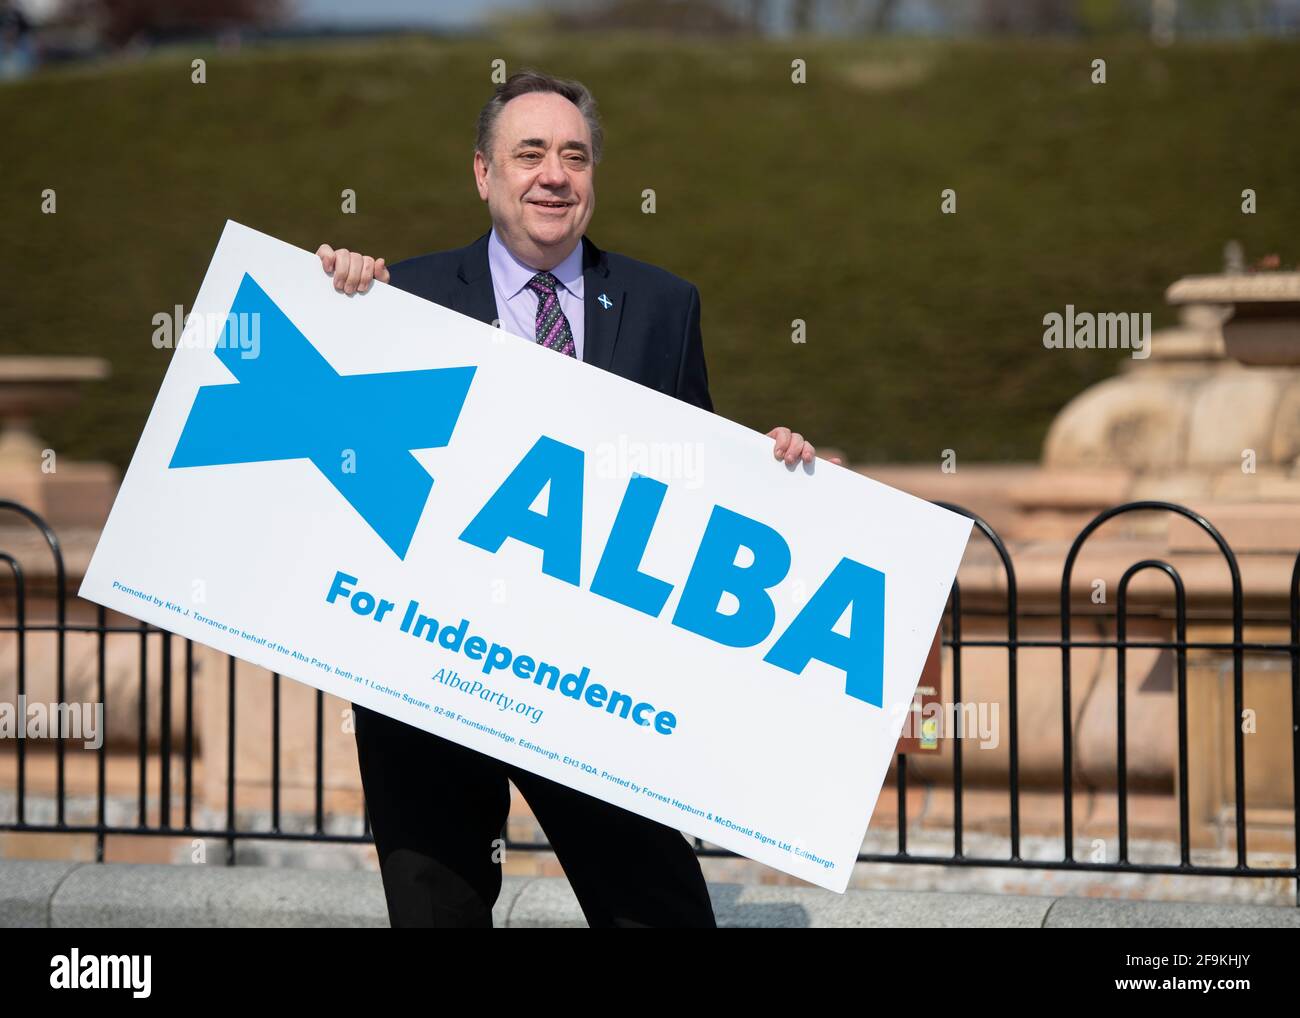 Glasgow, Scotland, UK. 19 April 2021. PICTURED: Alex Salmond Leader of the Alba Party marks the start of the ALBA Glasgow campaign with ALBA Glasgow Candidates: Cllr Michelle Ferns, Ailsa Gray, Cllr Shahid Farooq and Lynn McMahon. Mr Salmond will outline ALBA's plans to enhance the Educational Maintenance Allowance and Cllr Ferns will set out how ALBA intend to provide Financial support to taxi drivers and private hire drivers. Speaking in advance of the Photo call ALBA Party Leader Alex Salmond said: “ Today we are announcing targeted measures to support young people and taxi drivers acr Stock Photo